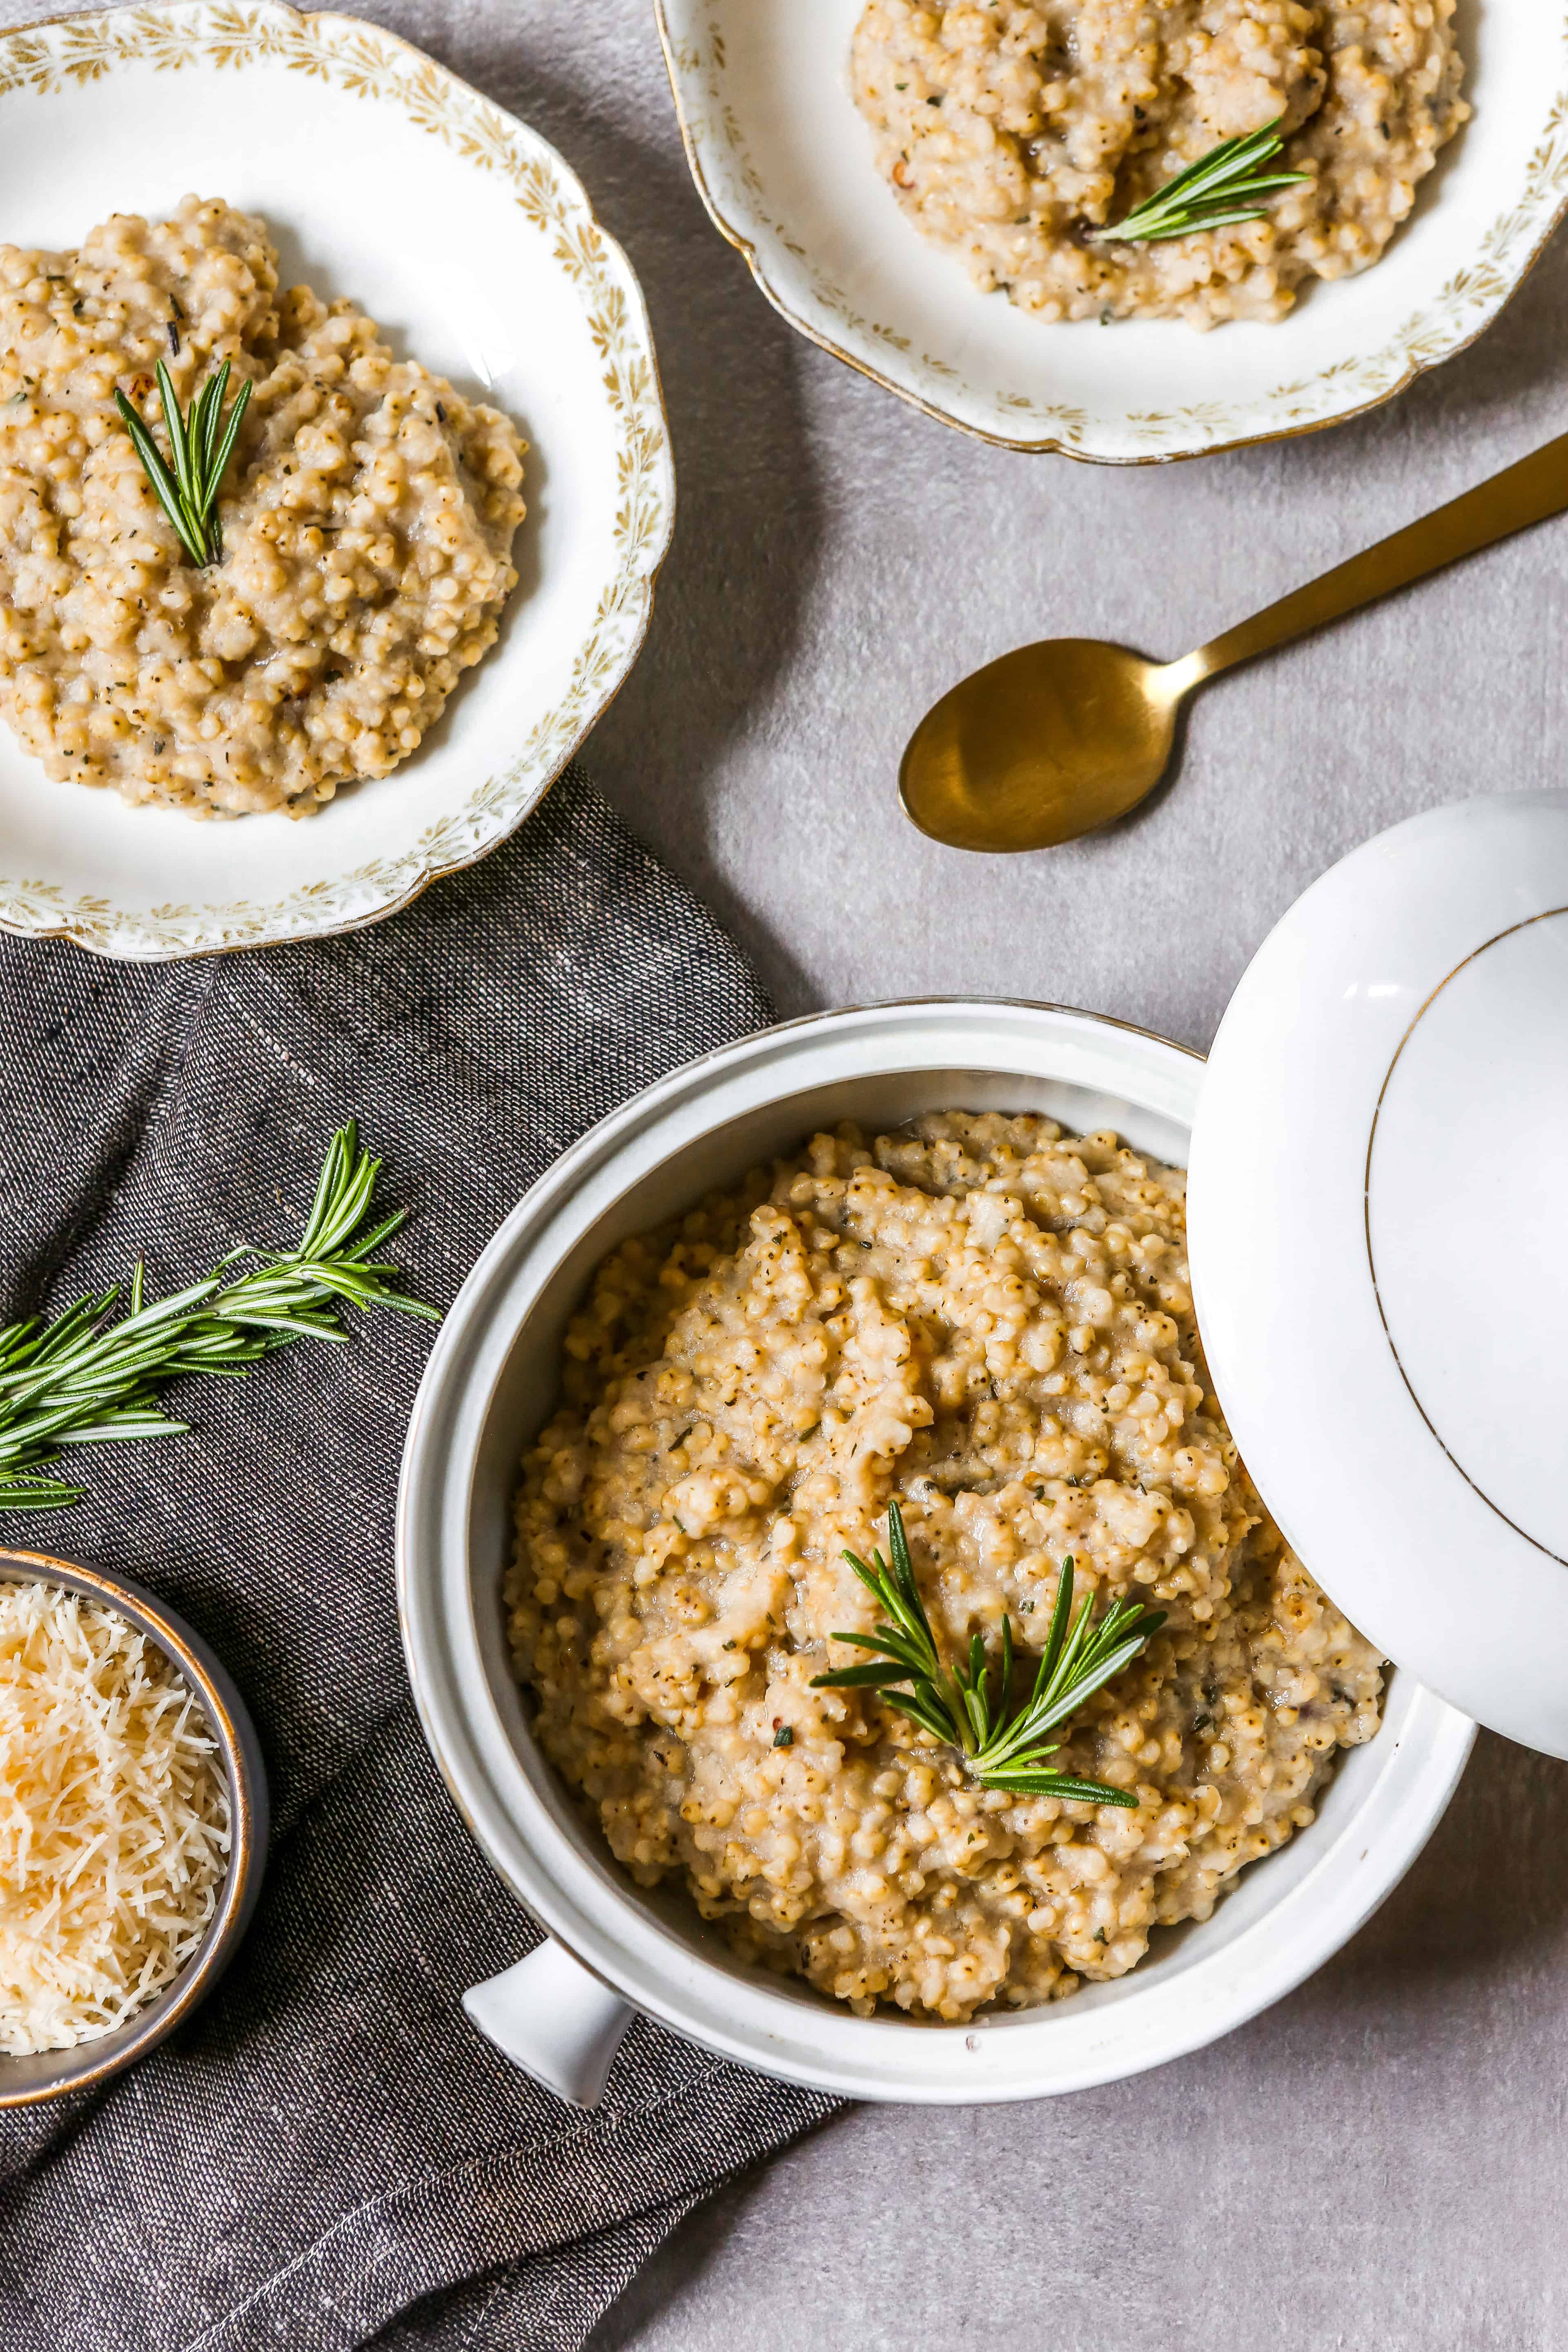 A white and gold bowl, filled with a serving or sorghum risotto and garnished with a sprig of rosemary